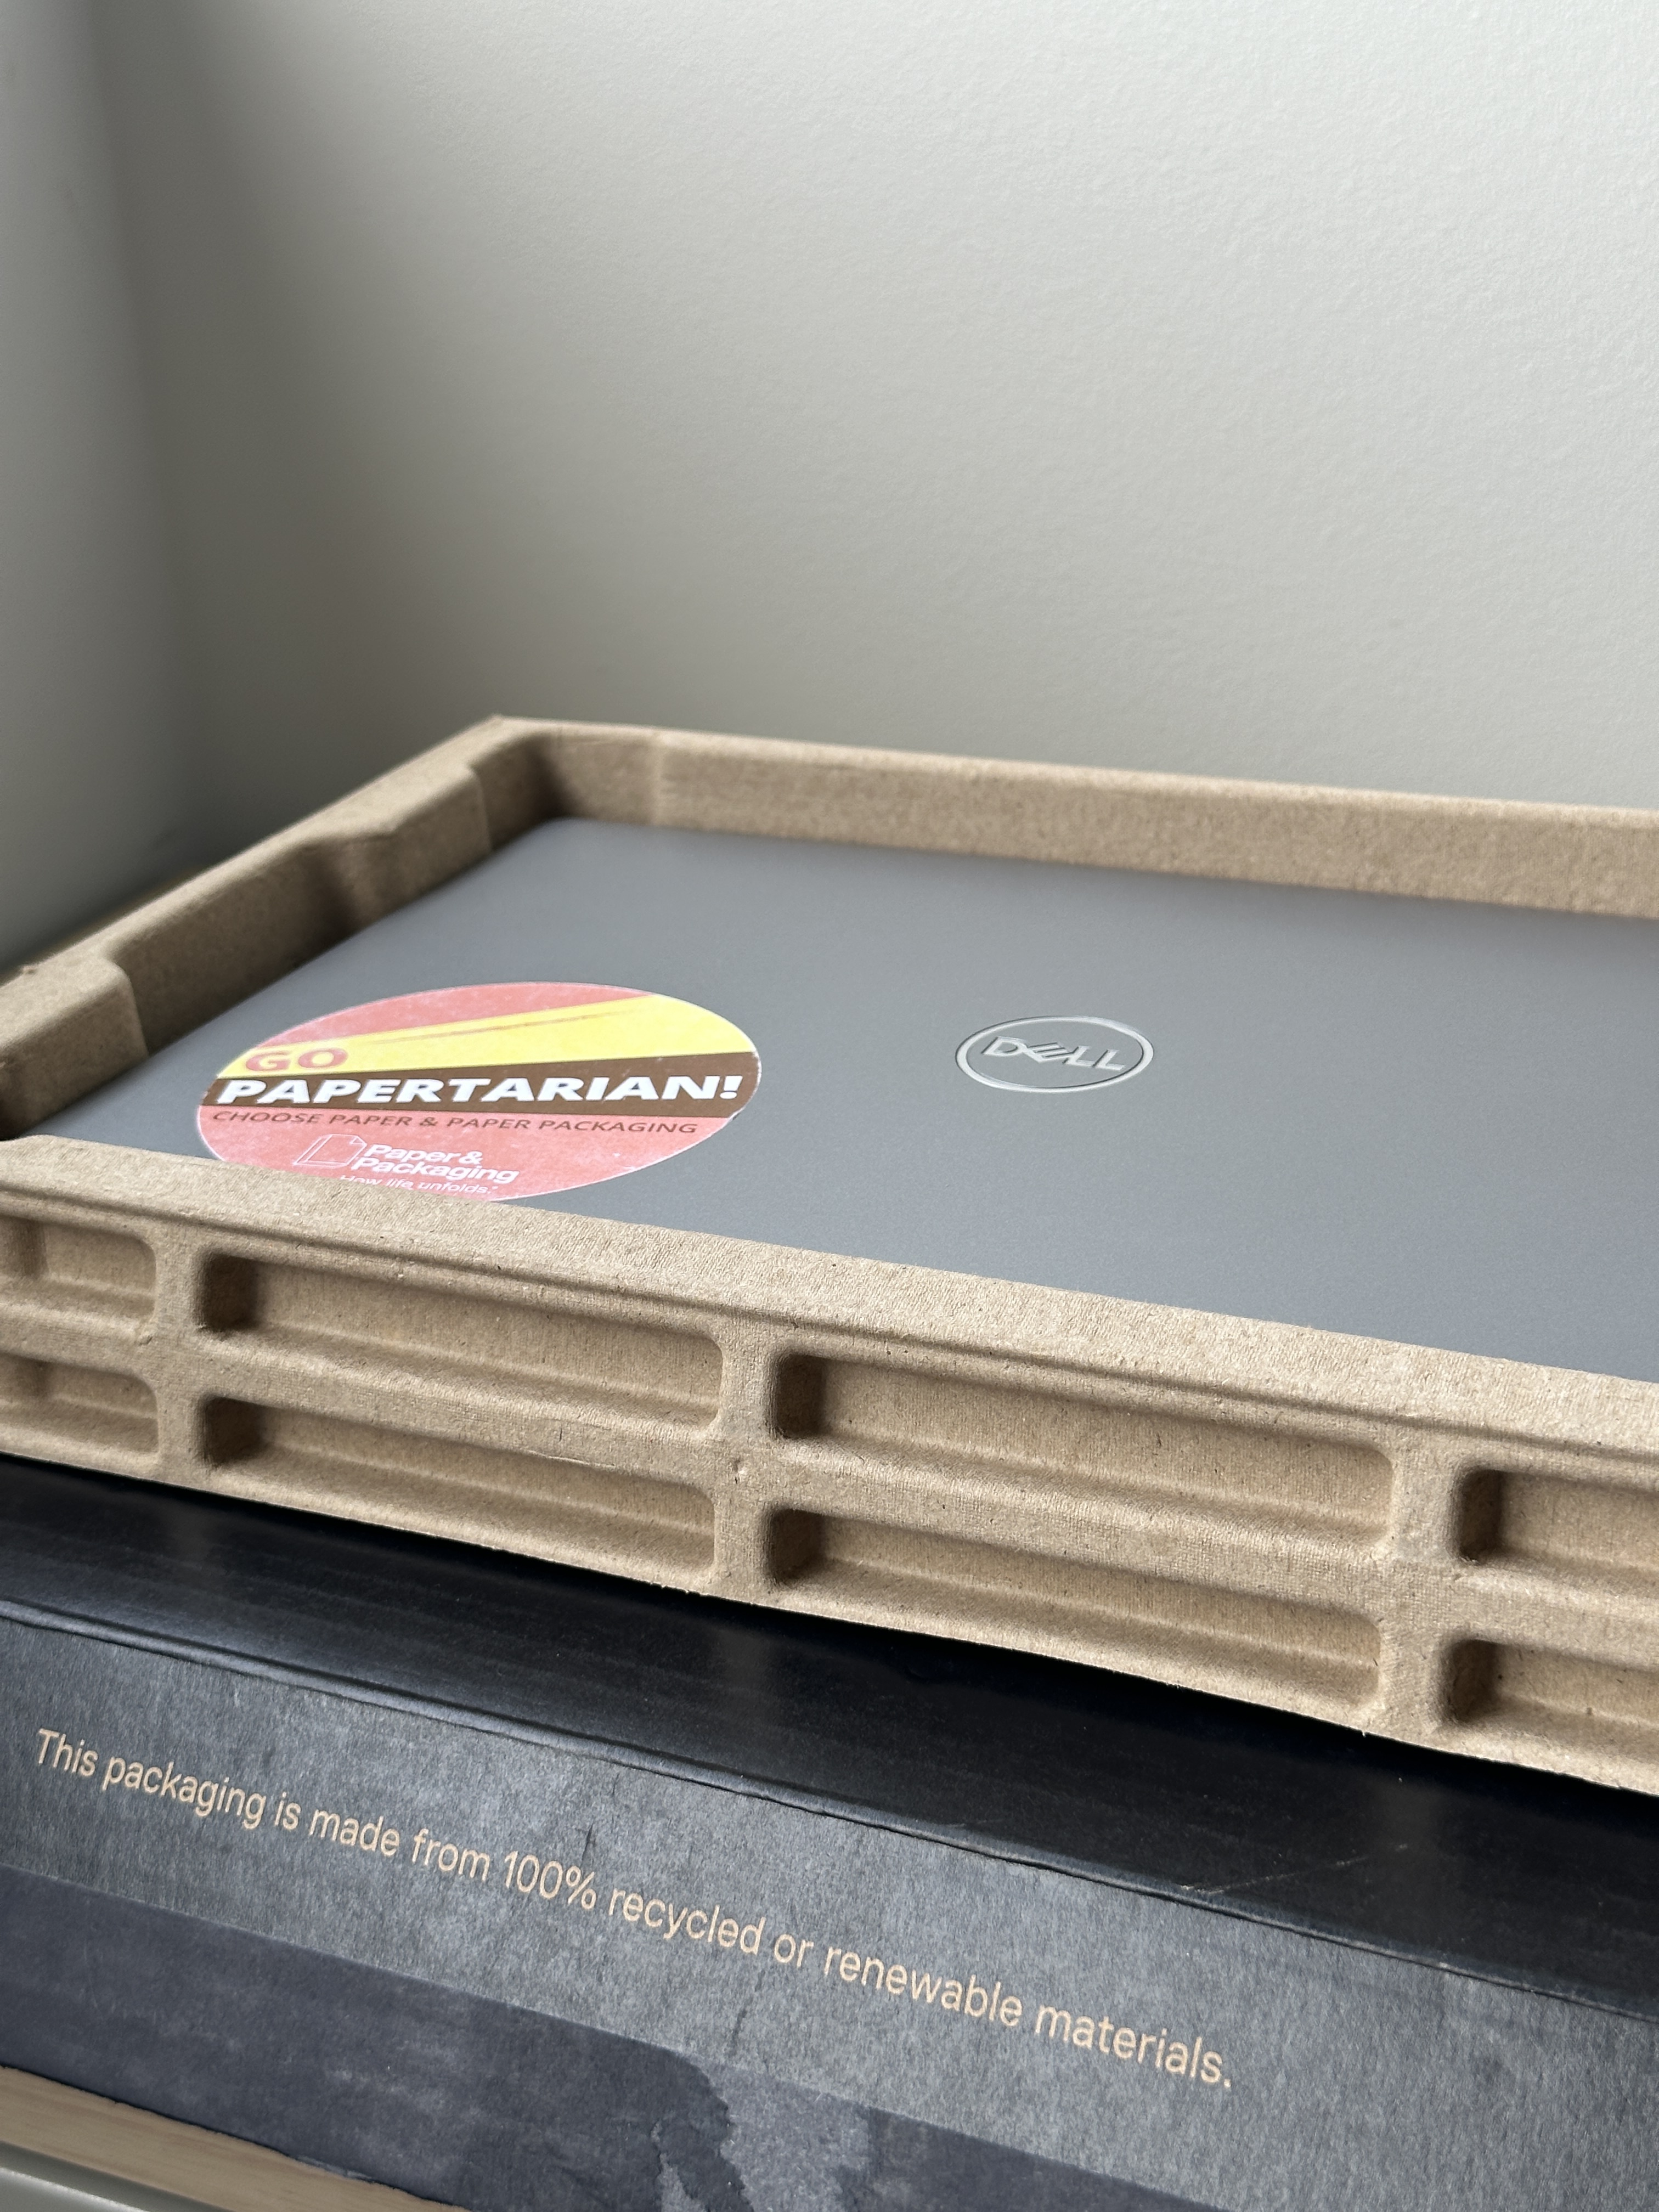 Dell packaging